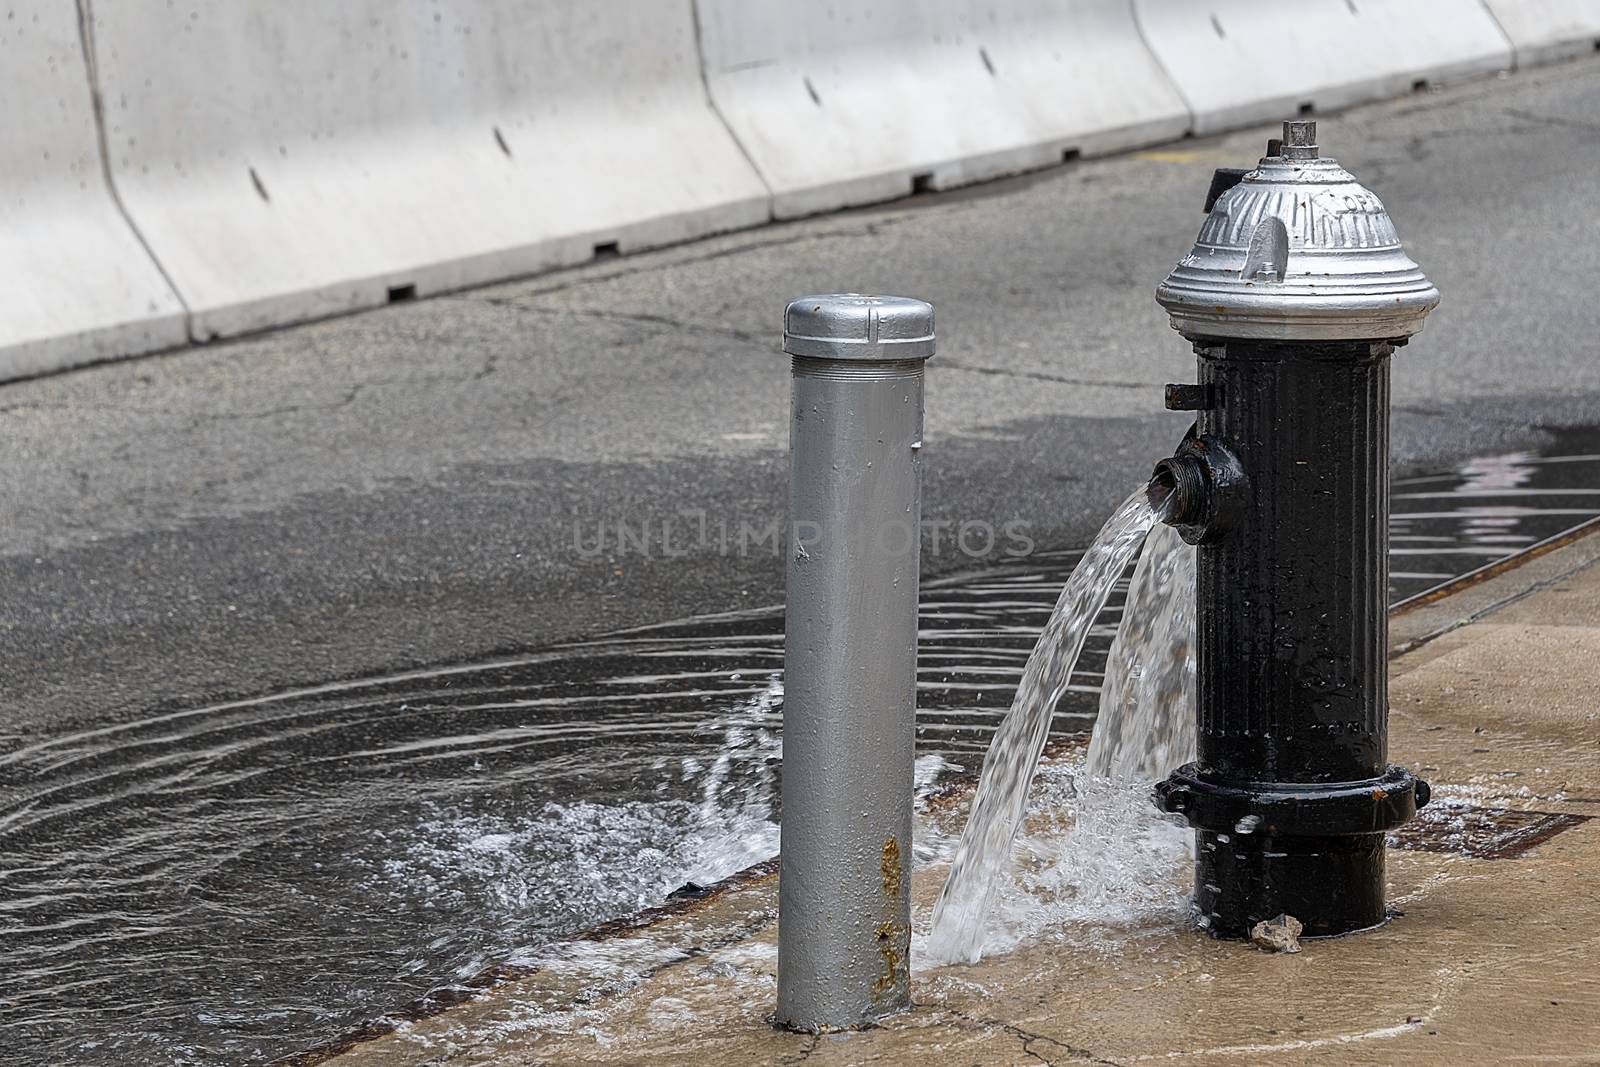 USA, New York - May 2019: Black fire hydrant discharging on the streets of New York